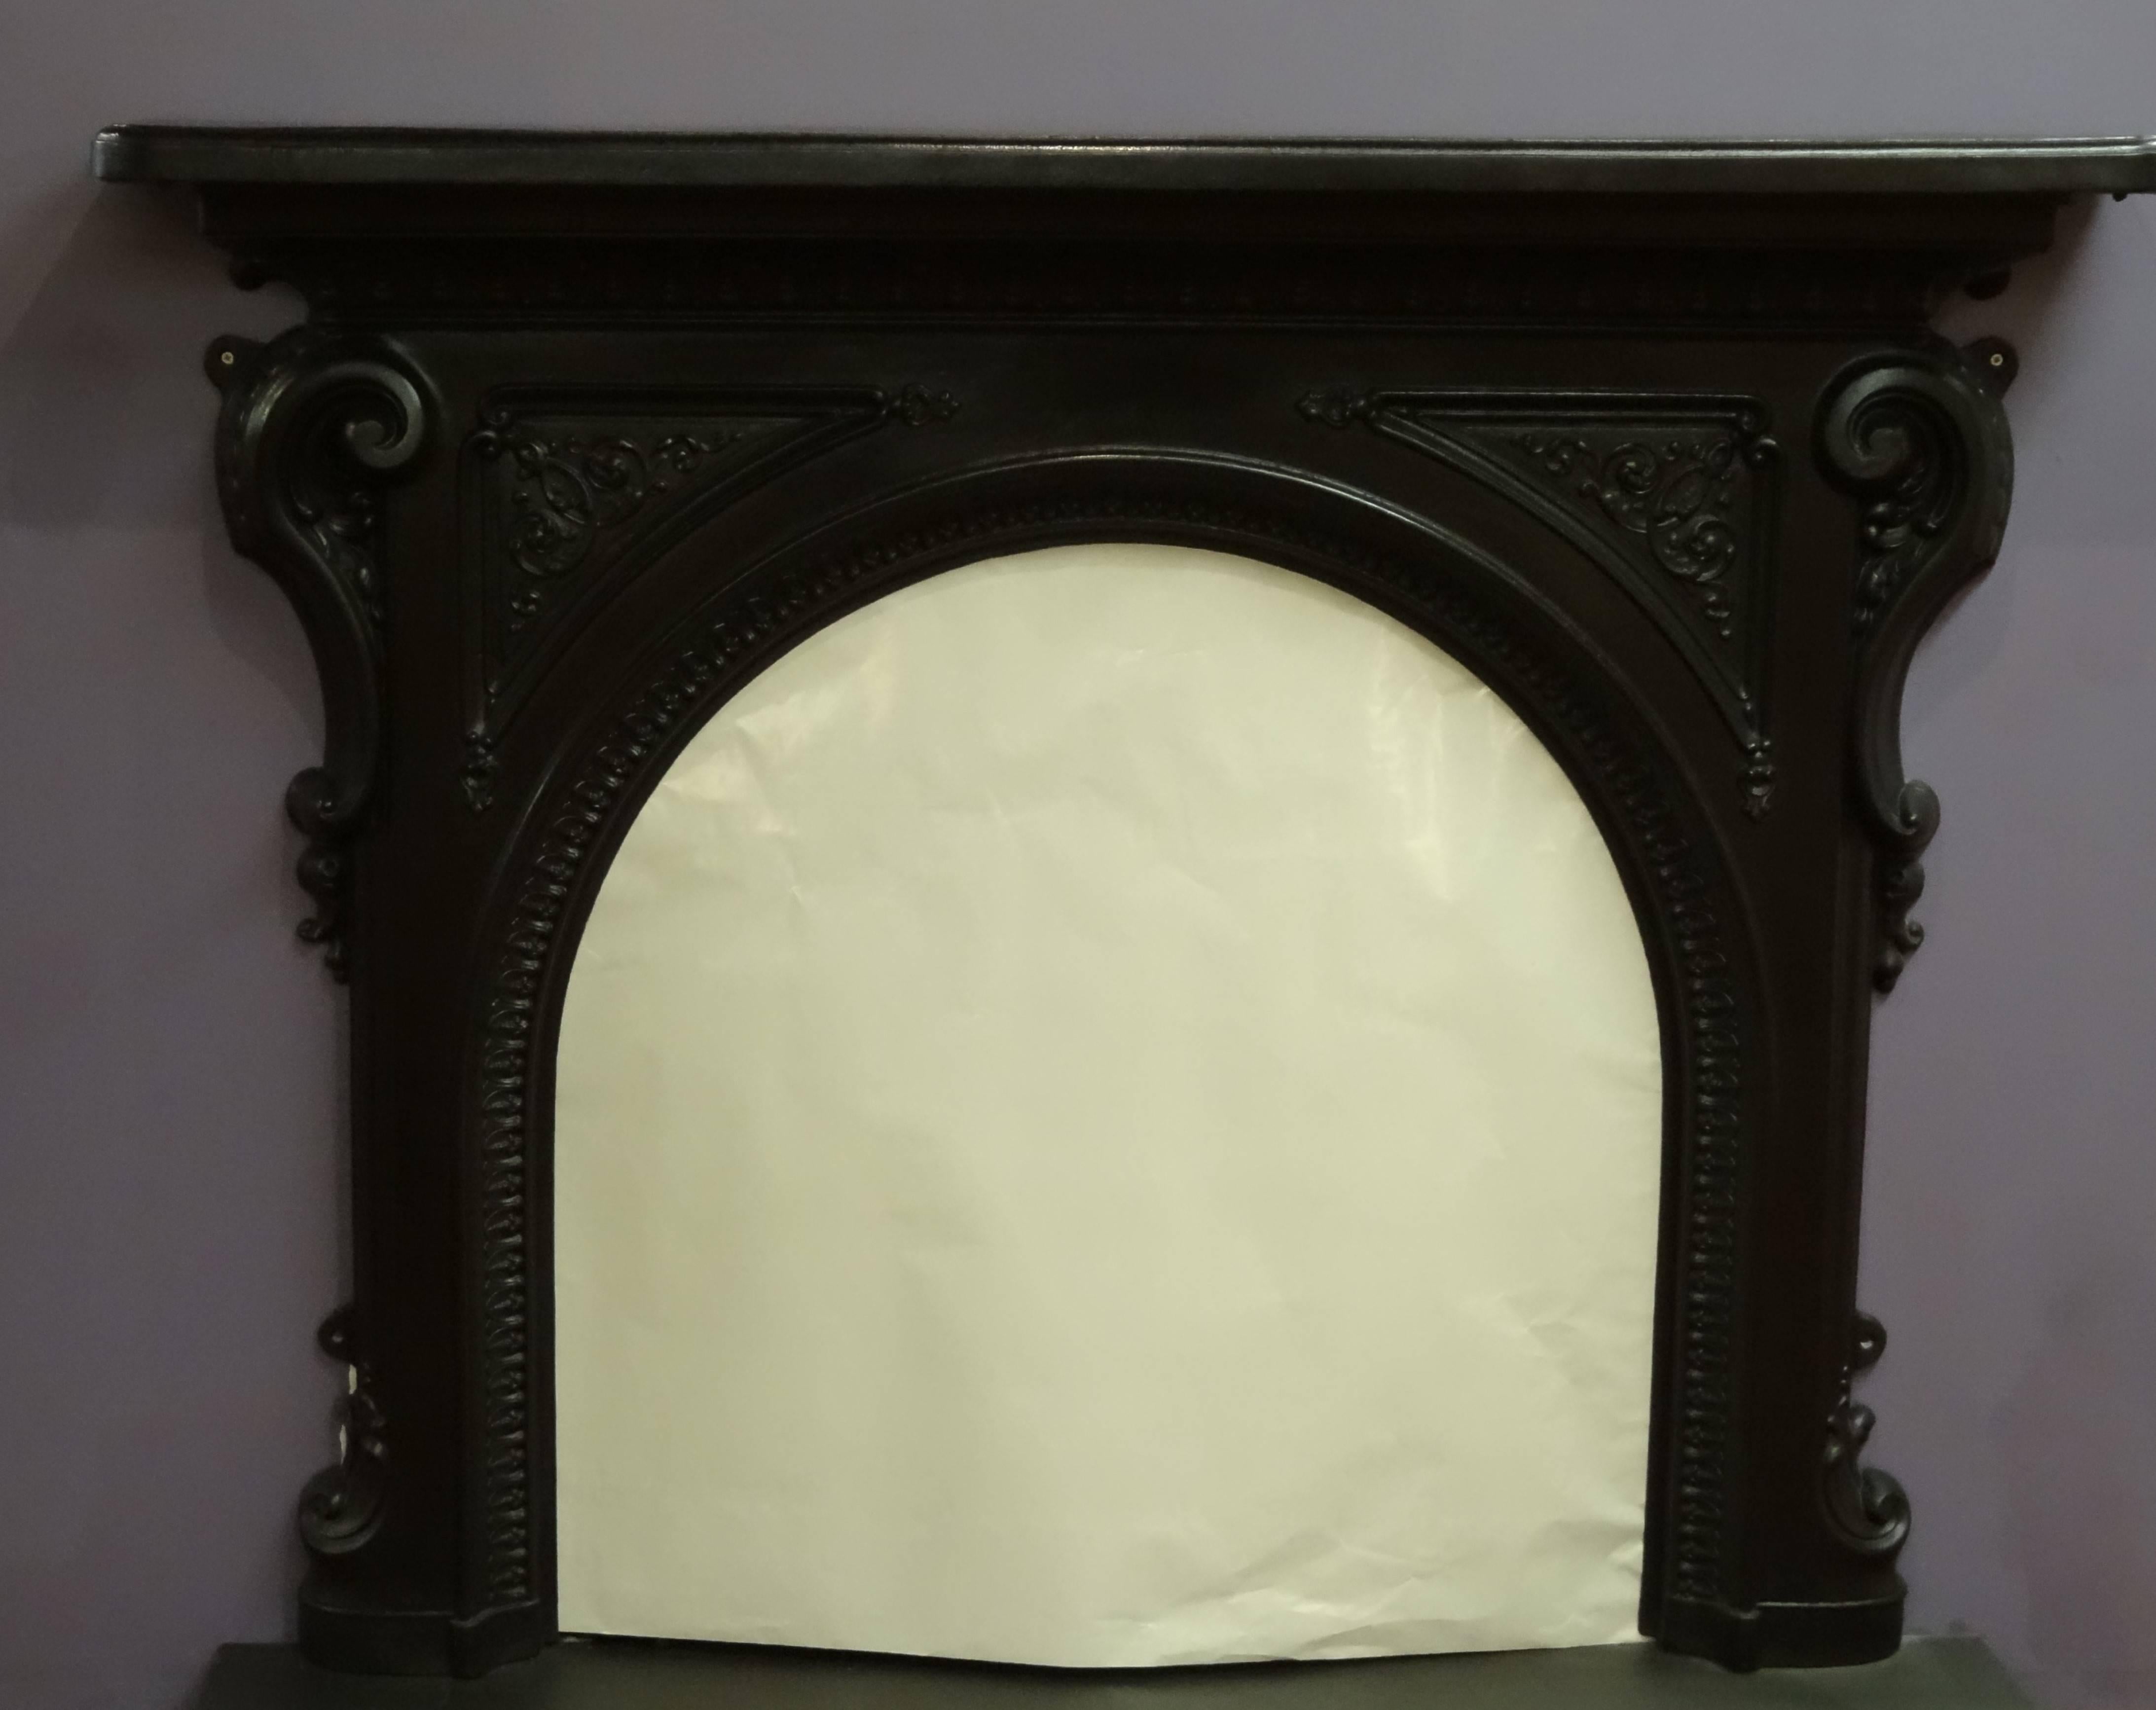 Victorian Arched cast iron fireplace surround featuring S scroll side corbels, decorative leaf detail on the arch and under the mantel. Cast Iron Insert priced separately.

External measurements:
Overall width 60.5 inches / 154 cm
Overall height